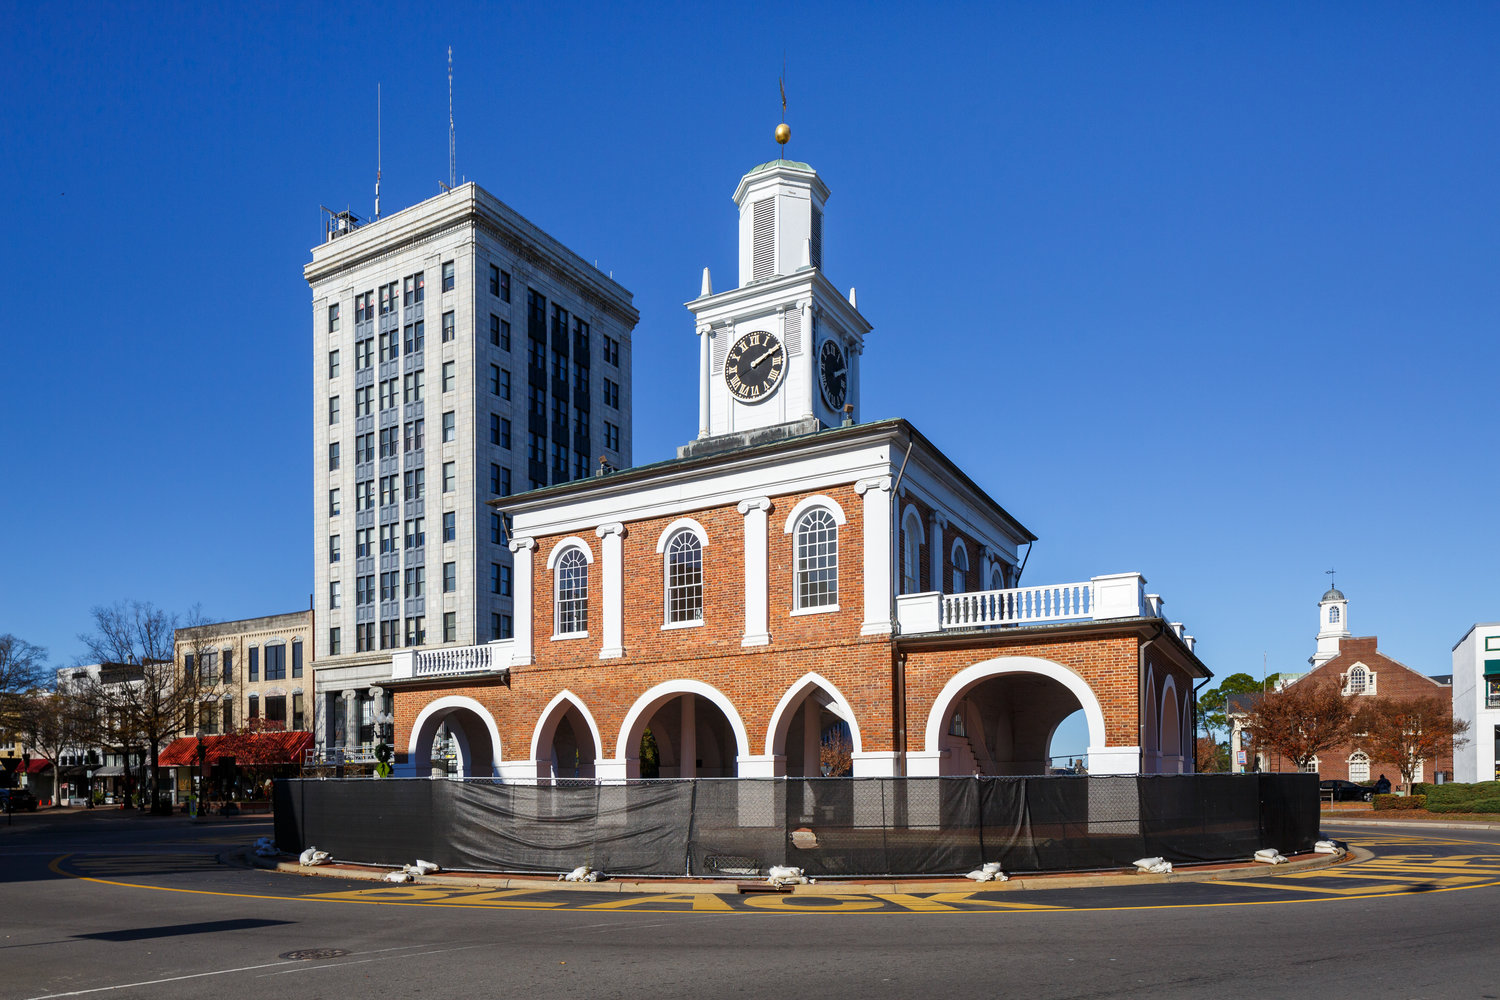 The City Council said Monday that it wants more public input before making a decision on how to repurpose the Market House.